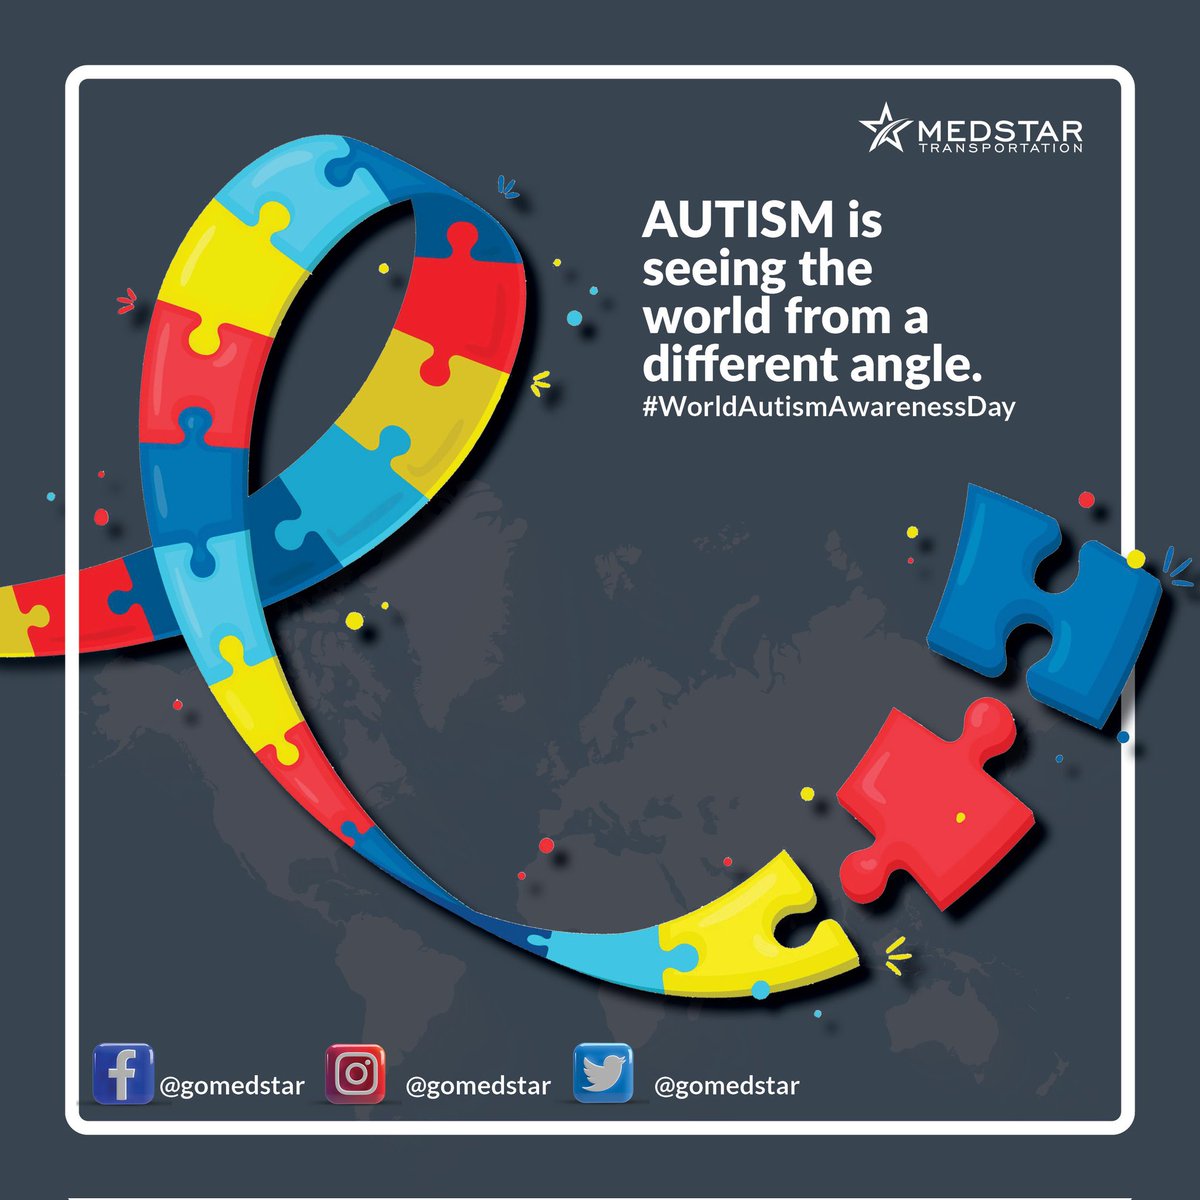 This #WorldAutismAwarenessDay, may we all be reminded that Autism is never a disability but a different ability. #autismawareness #autism #autismacceptance #autismfamily #asd #specialneeds #autismlove #autismlife #autismsupport #autistic #autismspectrum #autismspeaks #autismo